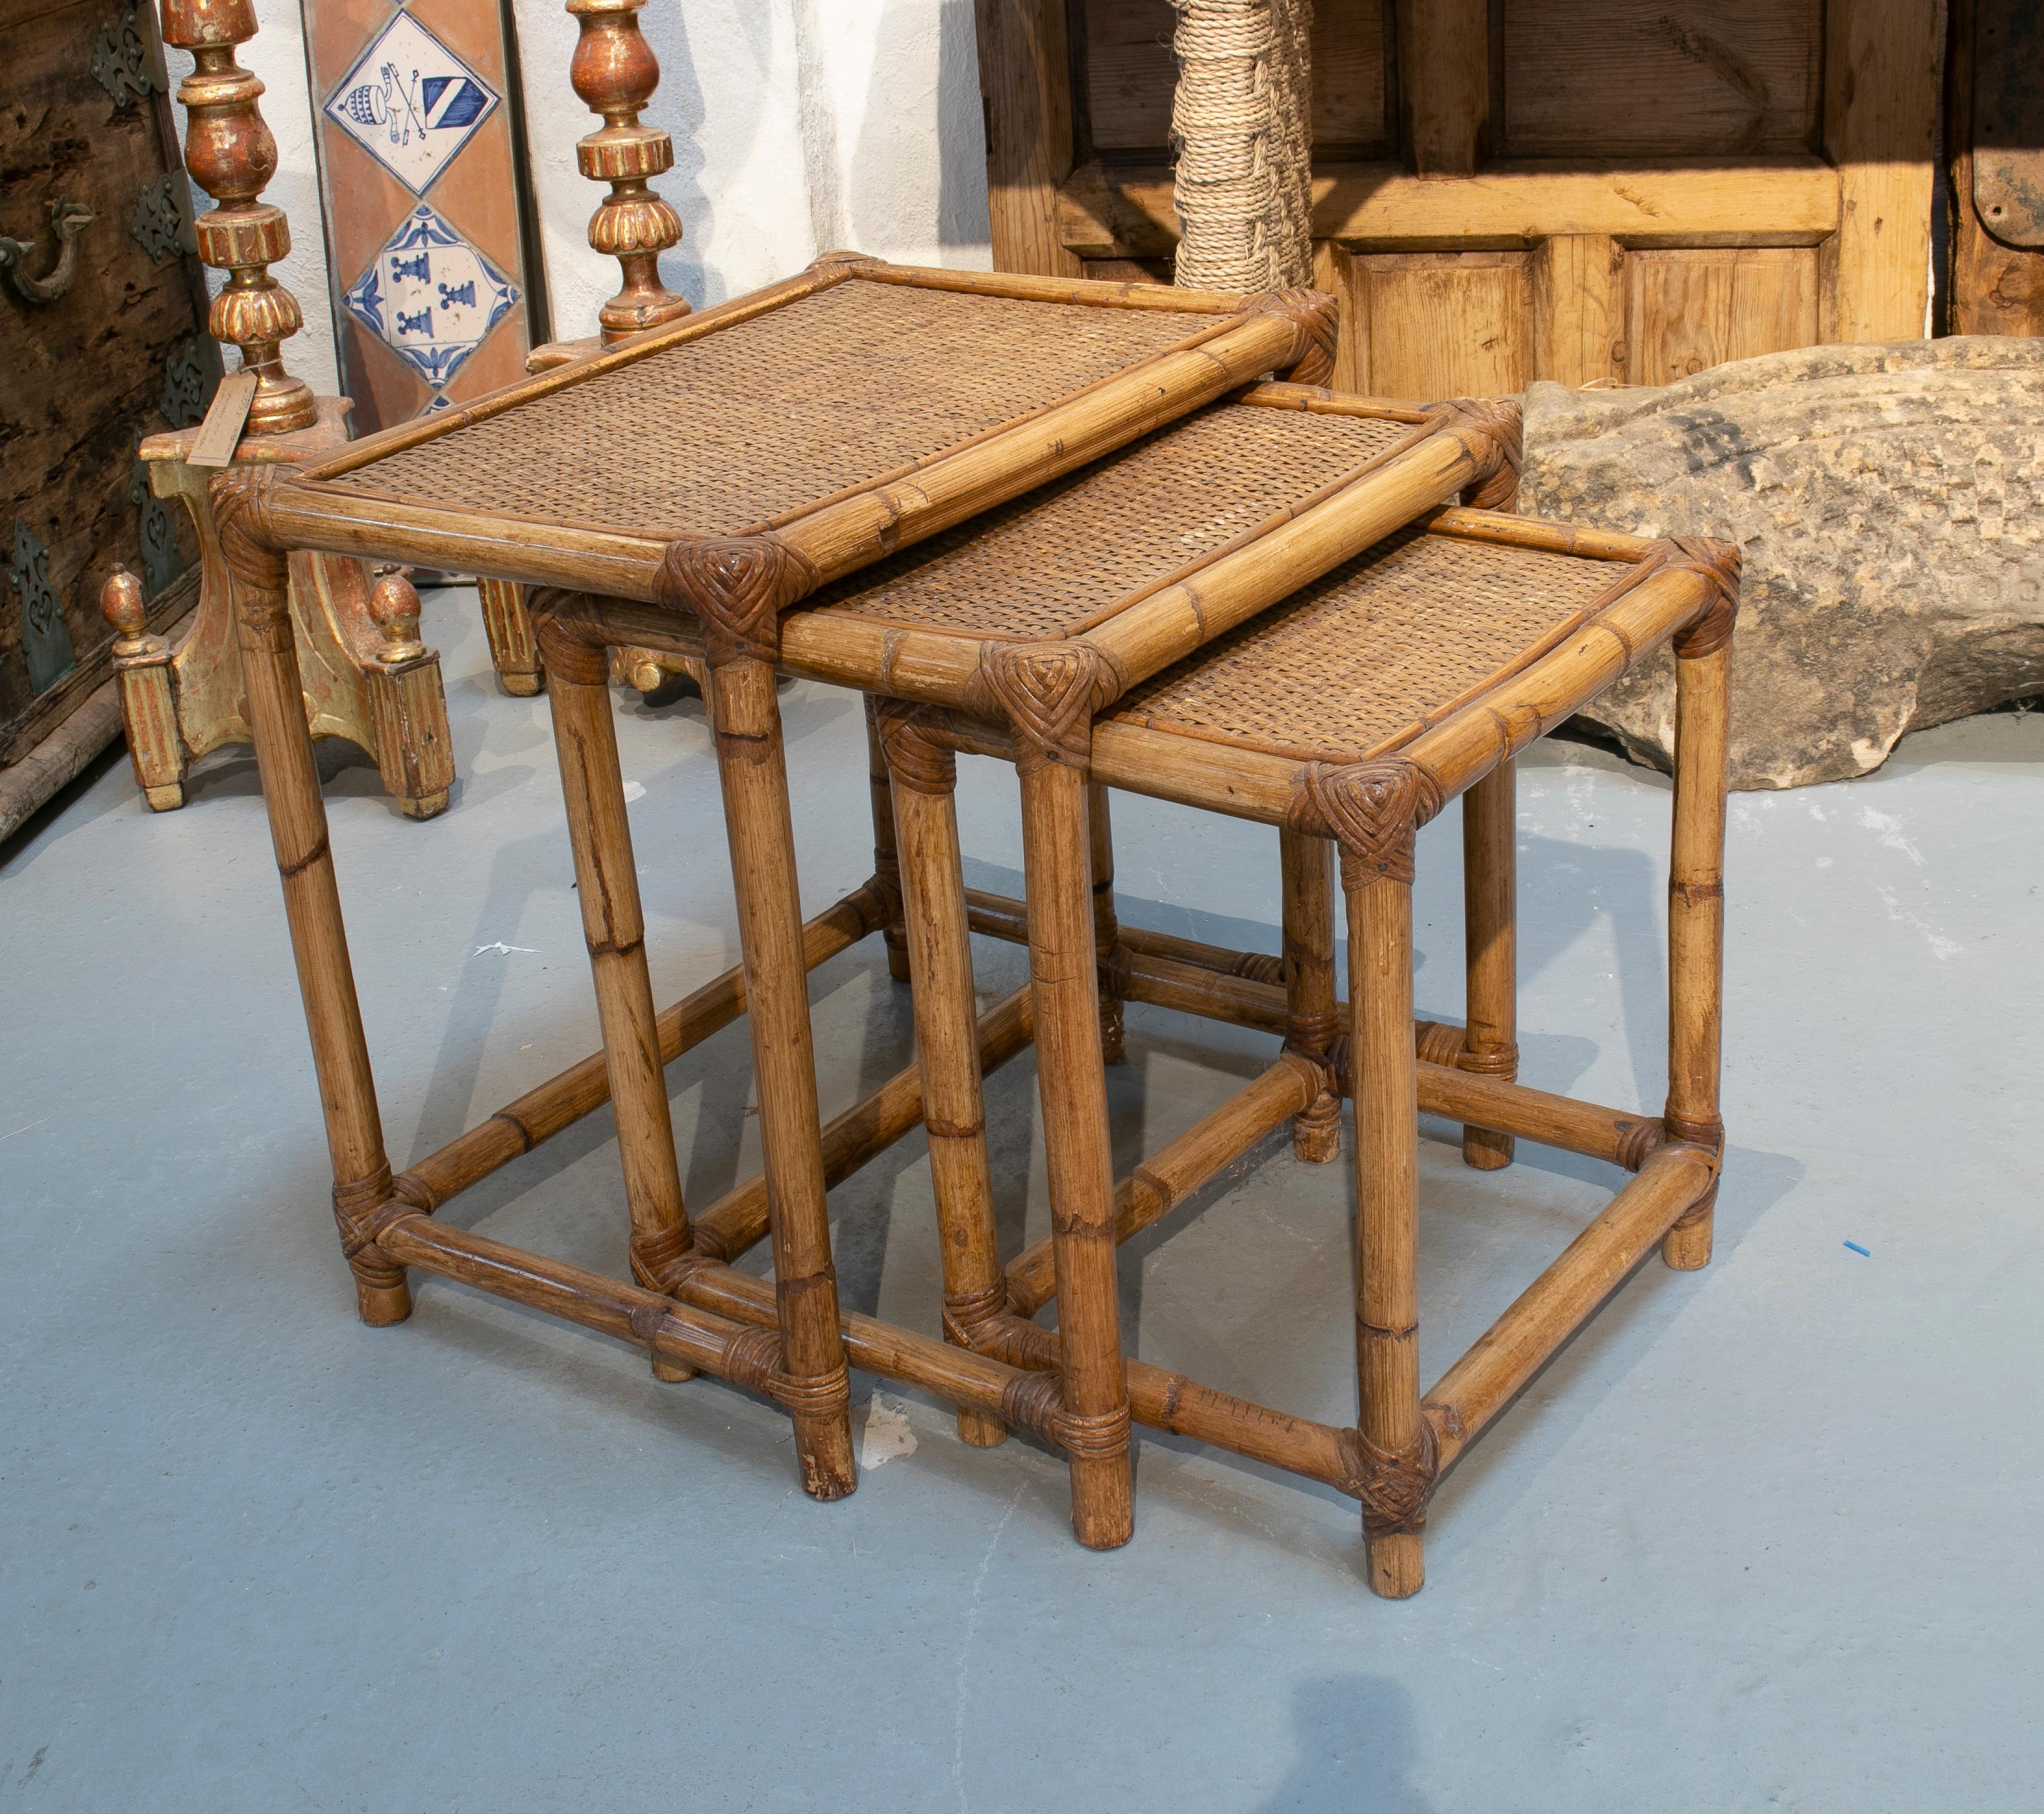 1980s Spanish set of three bamboo and rattan nesting tables.

Measures: Big table: 50 x 53 x 36cm
Median table: 46 x 45 x 31cm
Middle table: 42 x 37 x 28cm.